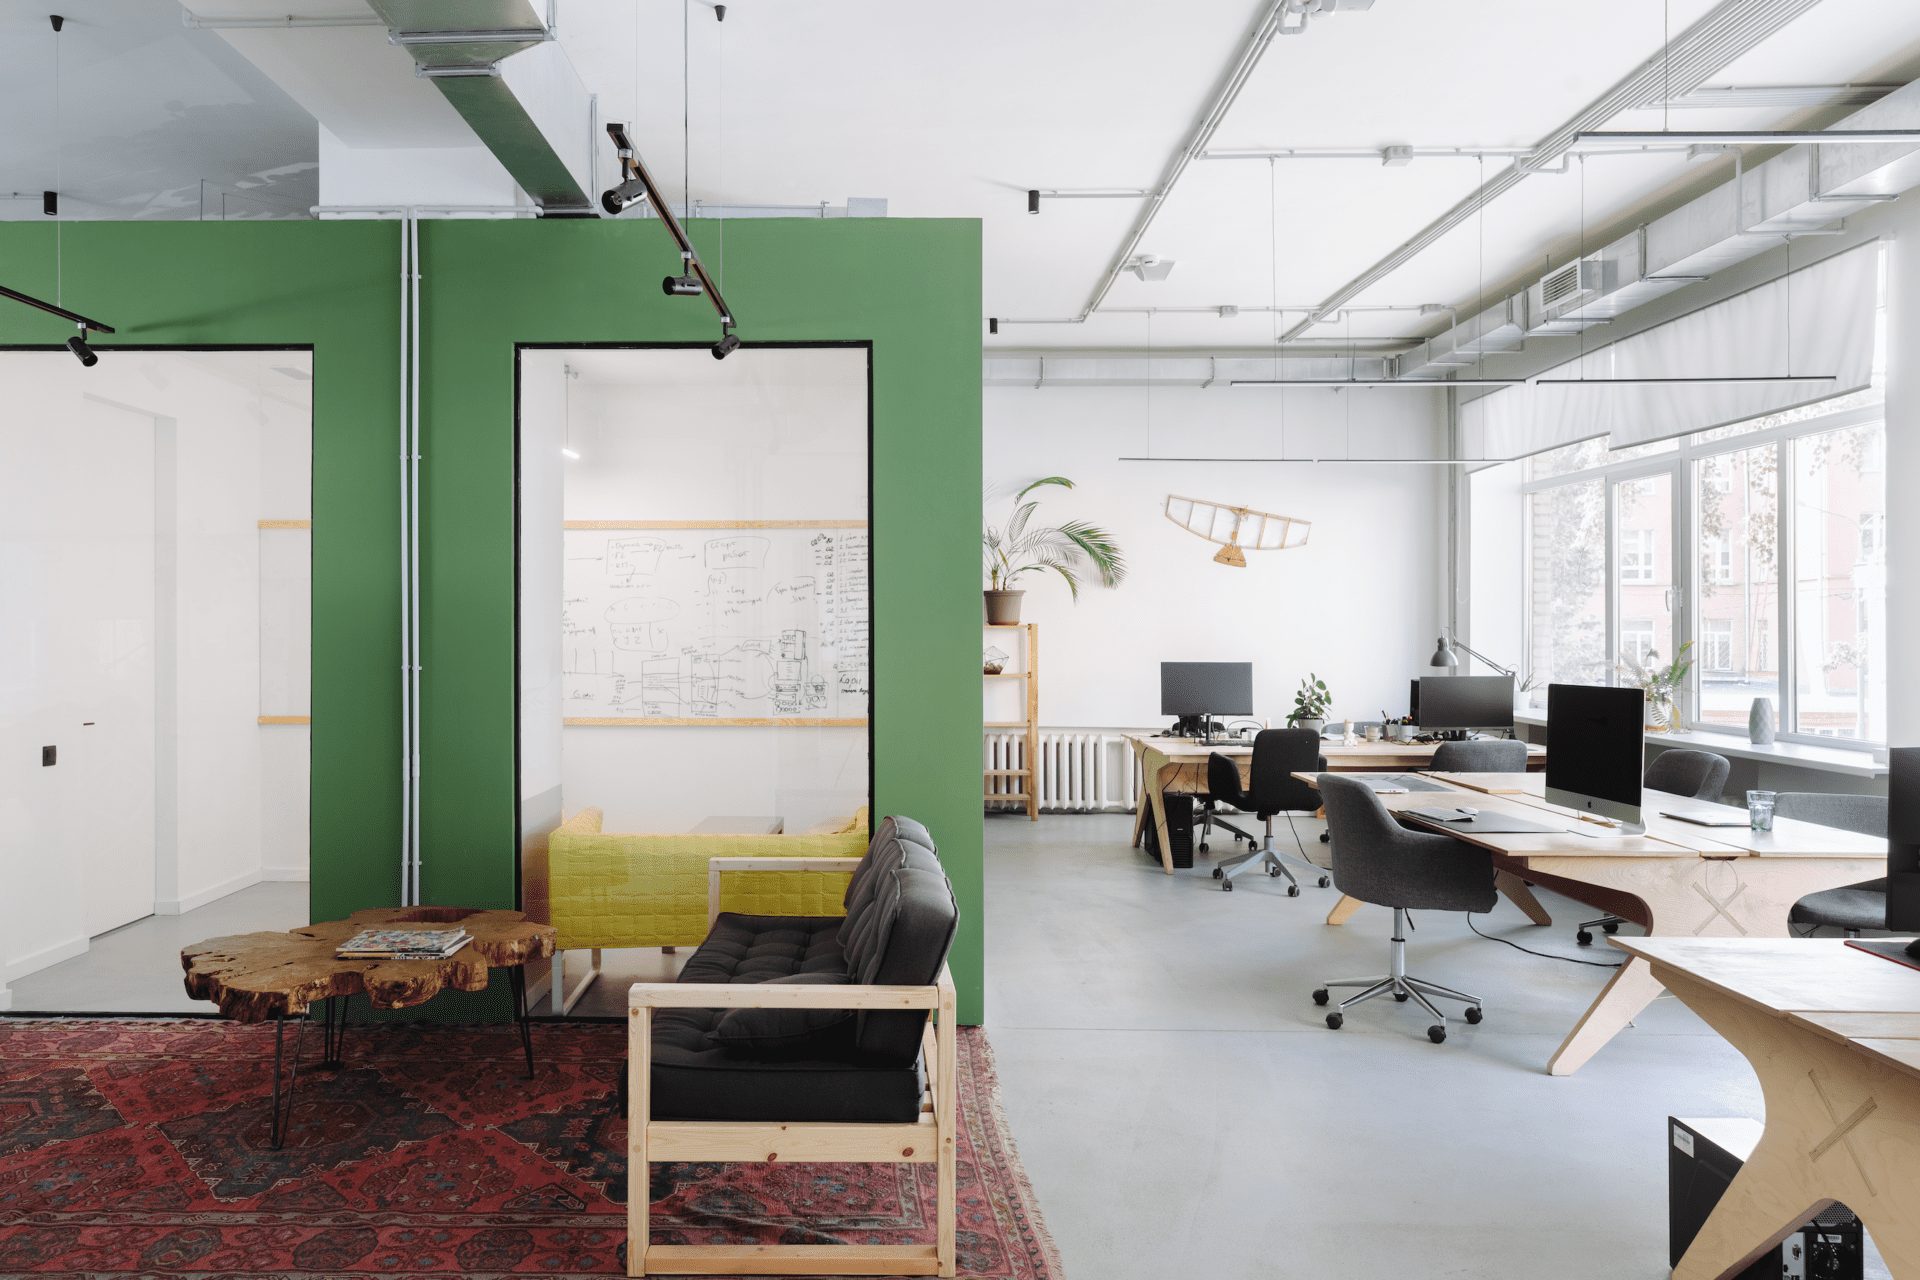 This flexible Moscow workspace shows how to balance work and leisure